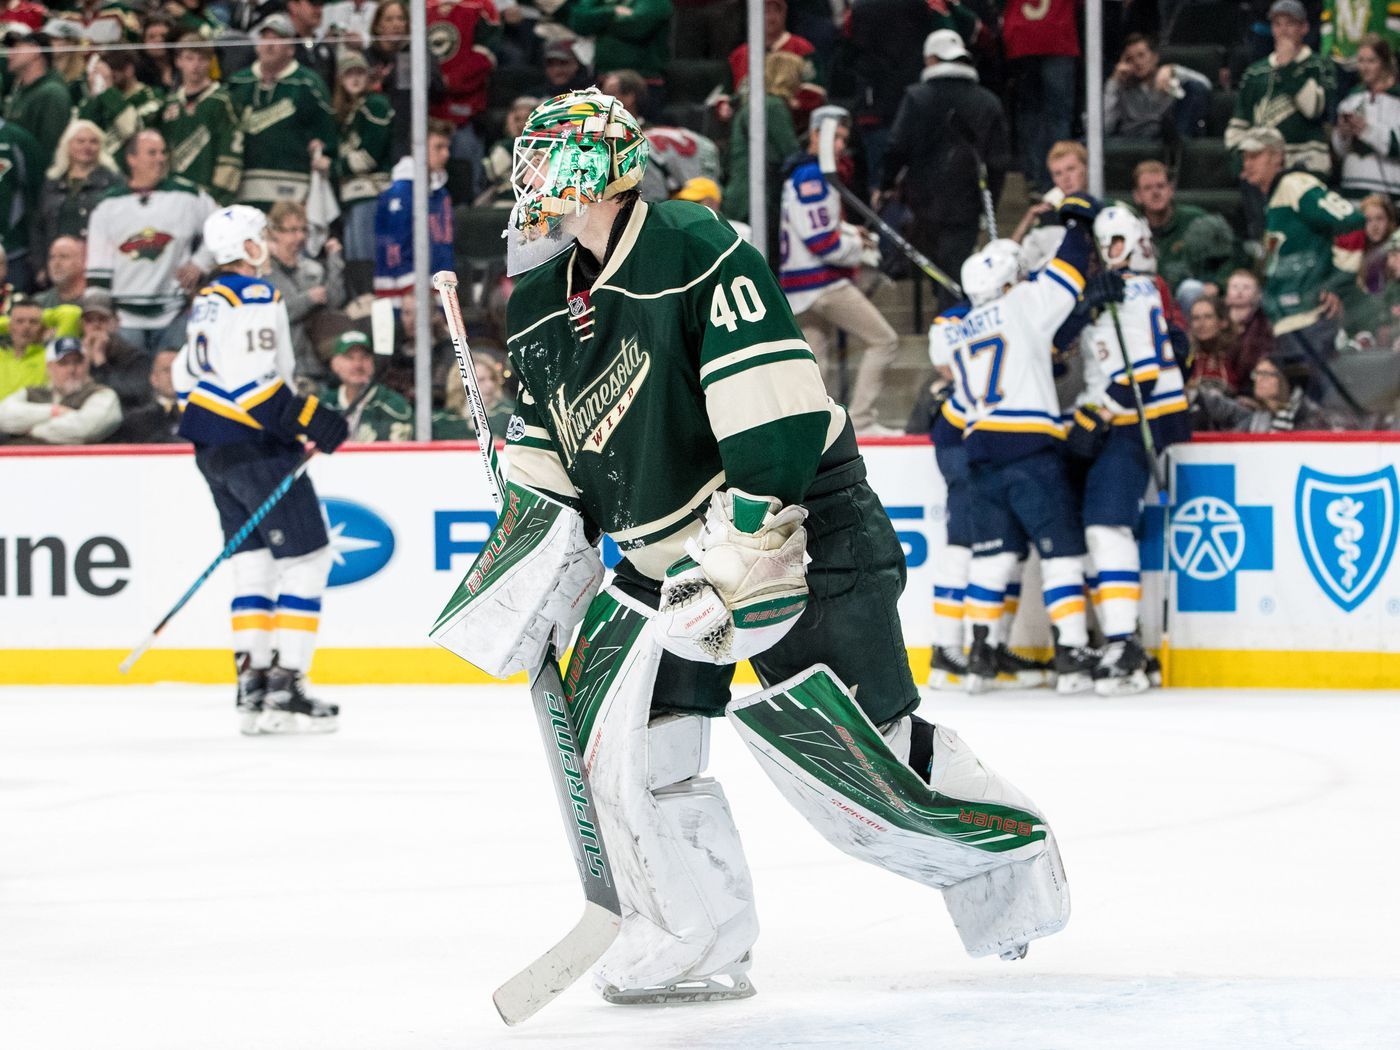 Blues vs. Wild: Devan Dubnyk just needs more of the same for a